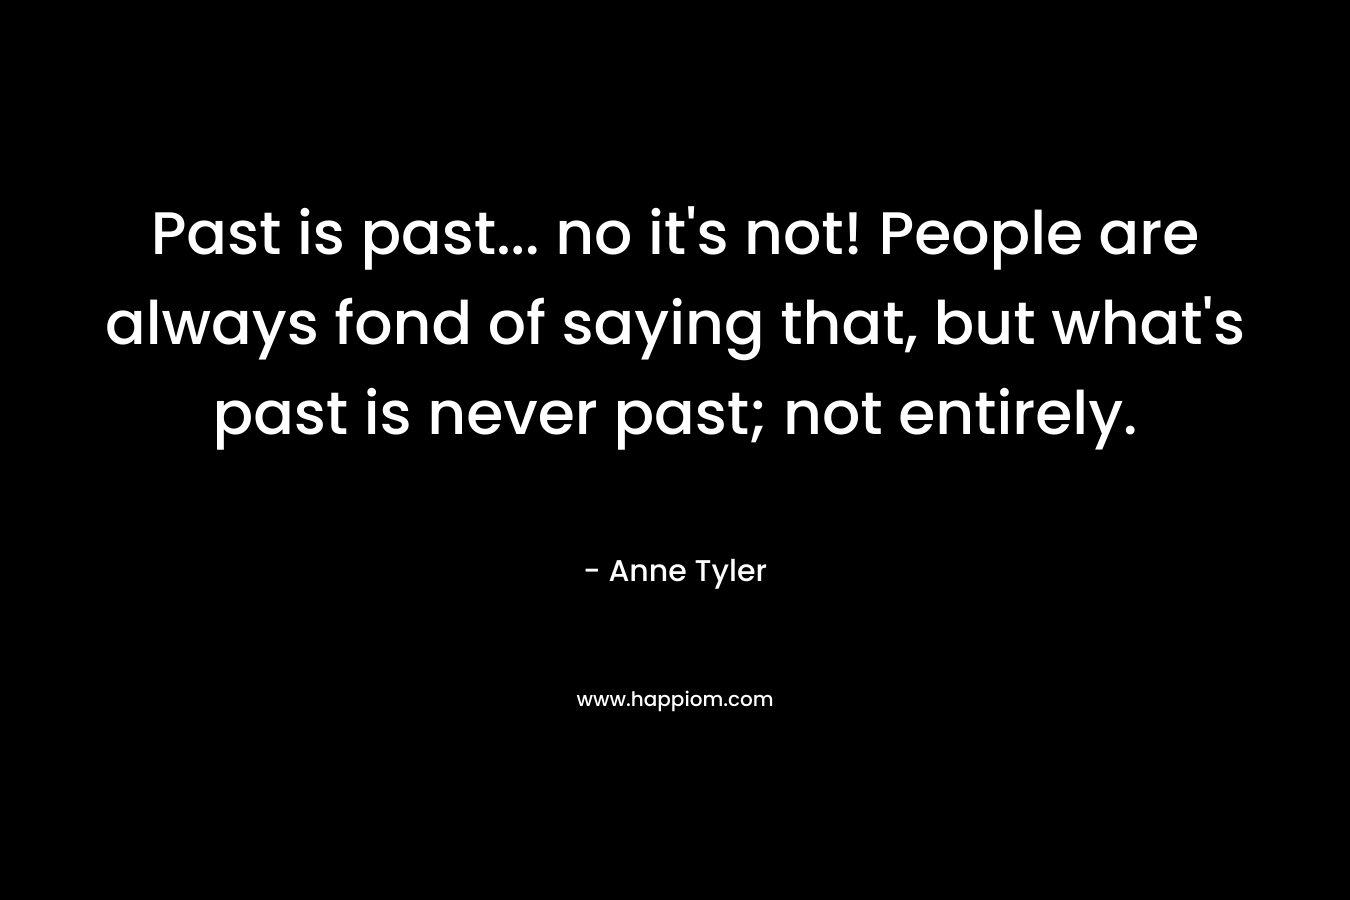 Past is past... no it's not! People are always fond of saying that, but what's past is never past; not entirely.